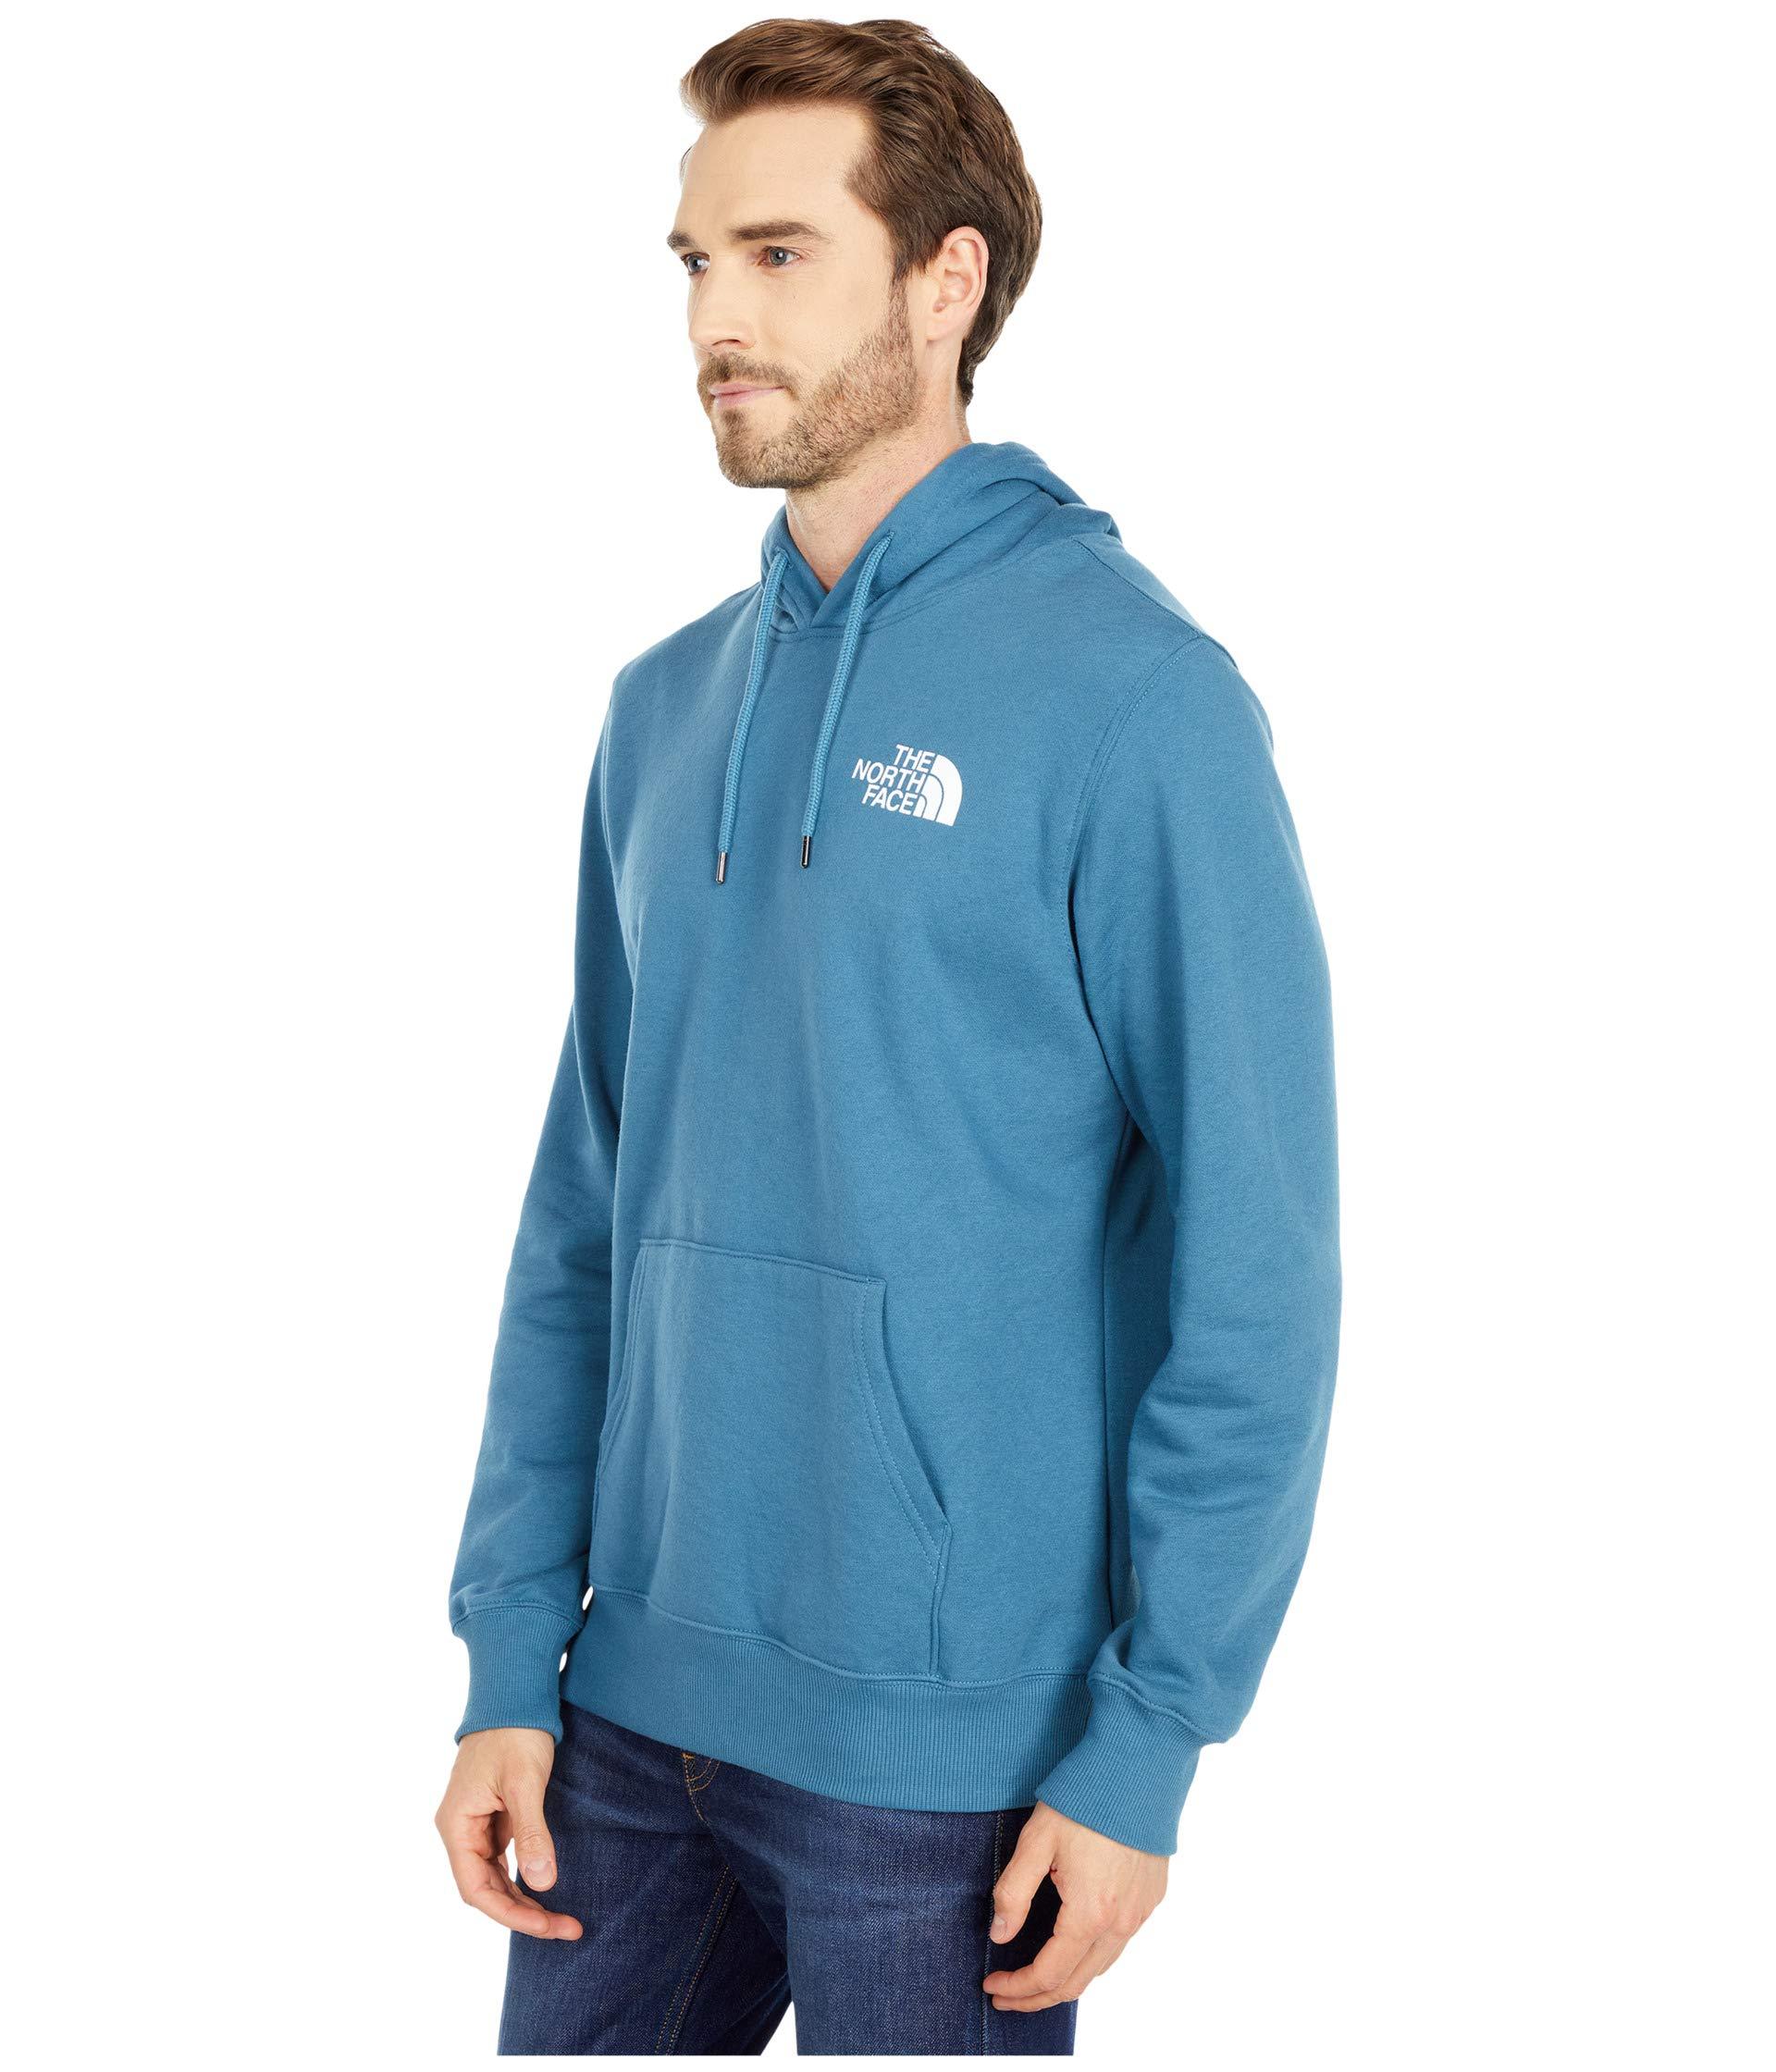 The North Face Cotton Box Nse Pullover Hoodie in Blue for Men - Lyst